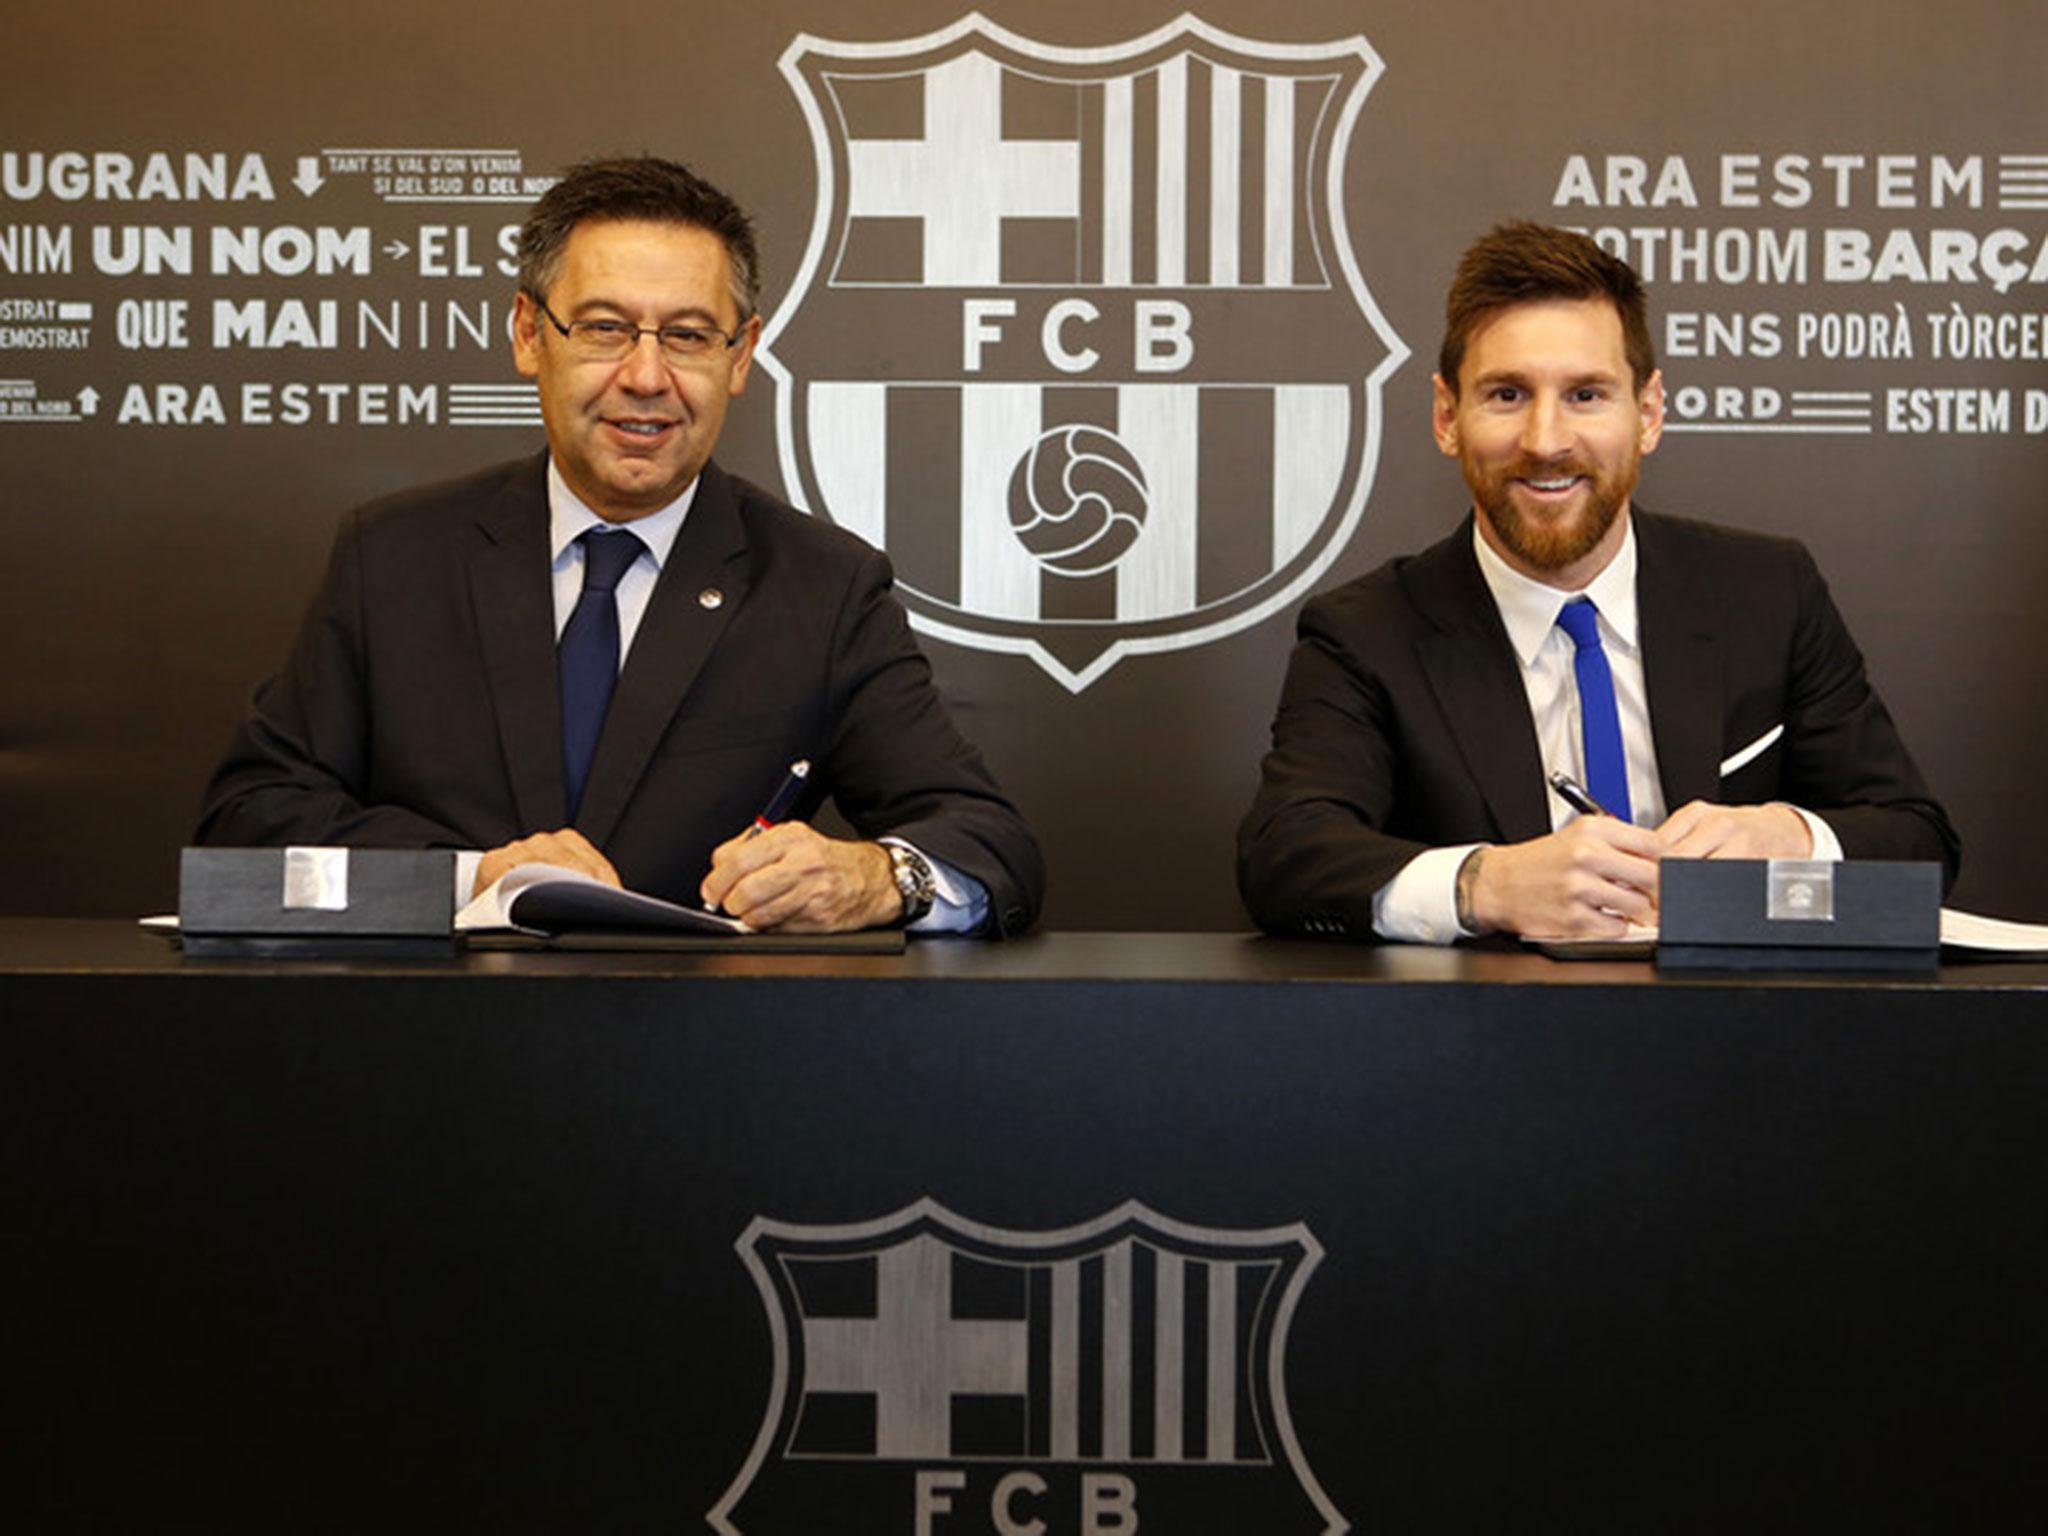 Lionel Messi has committed himself to Barcelona until 2021